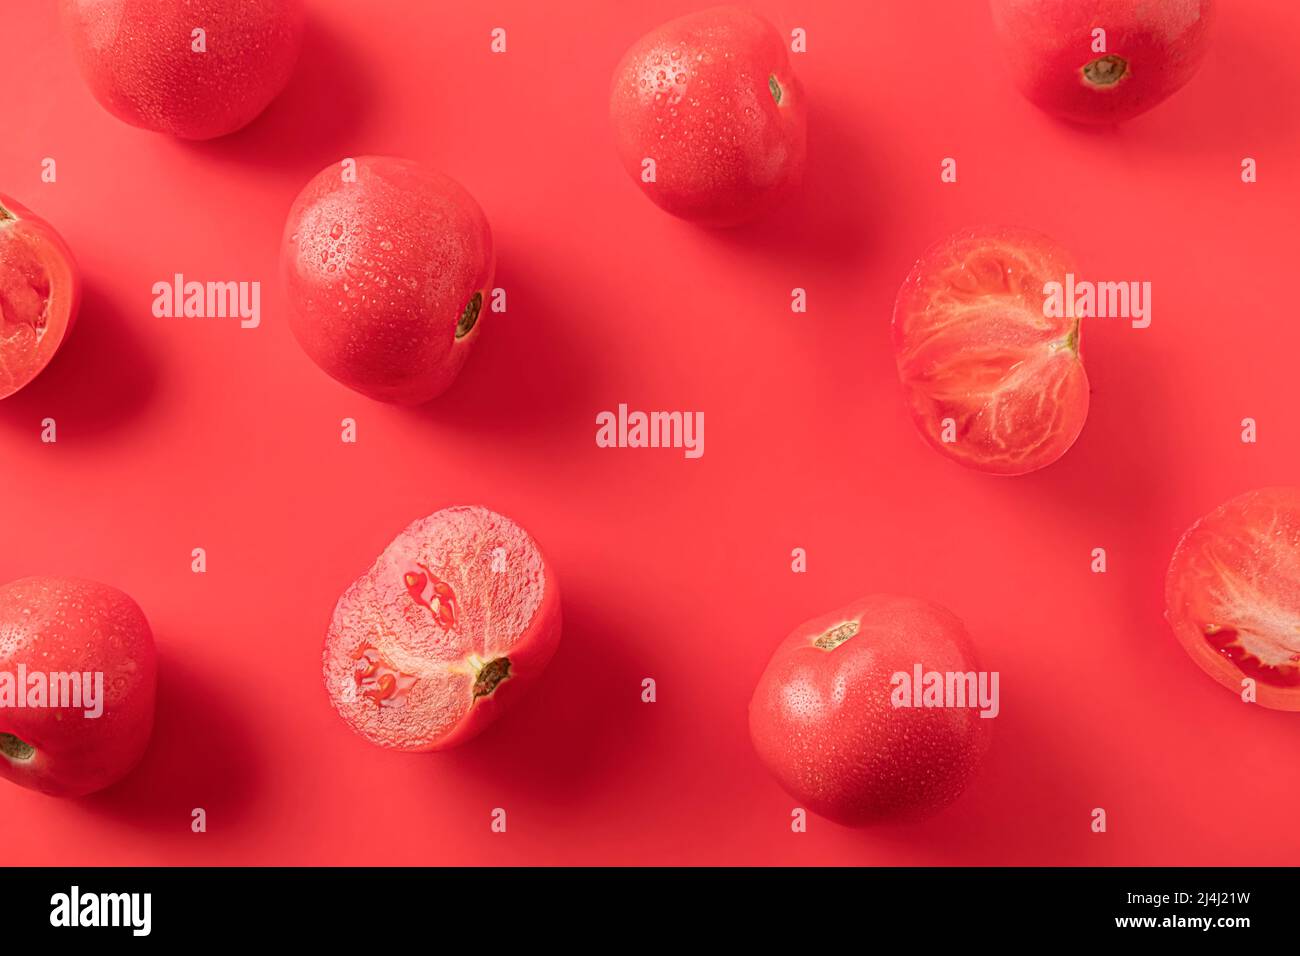 Background with ripe tomatoes on red. Fresh produce Stock Photo